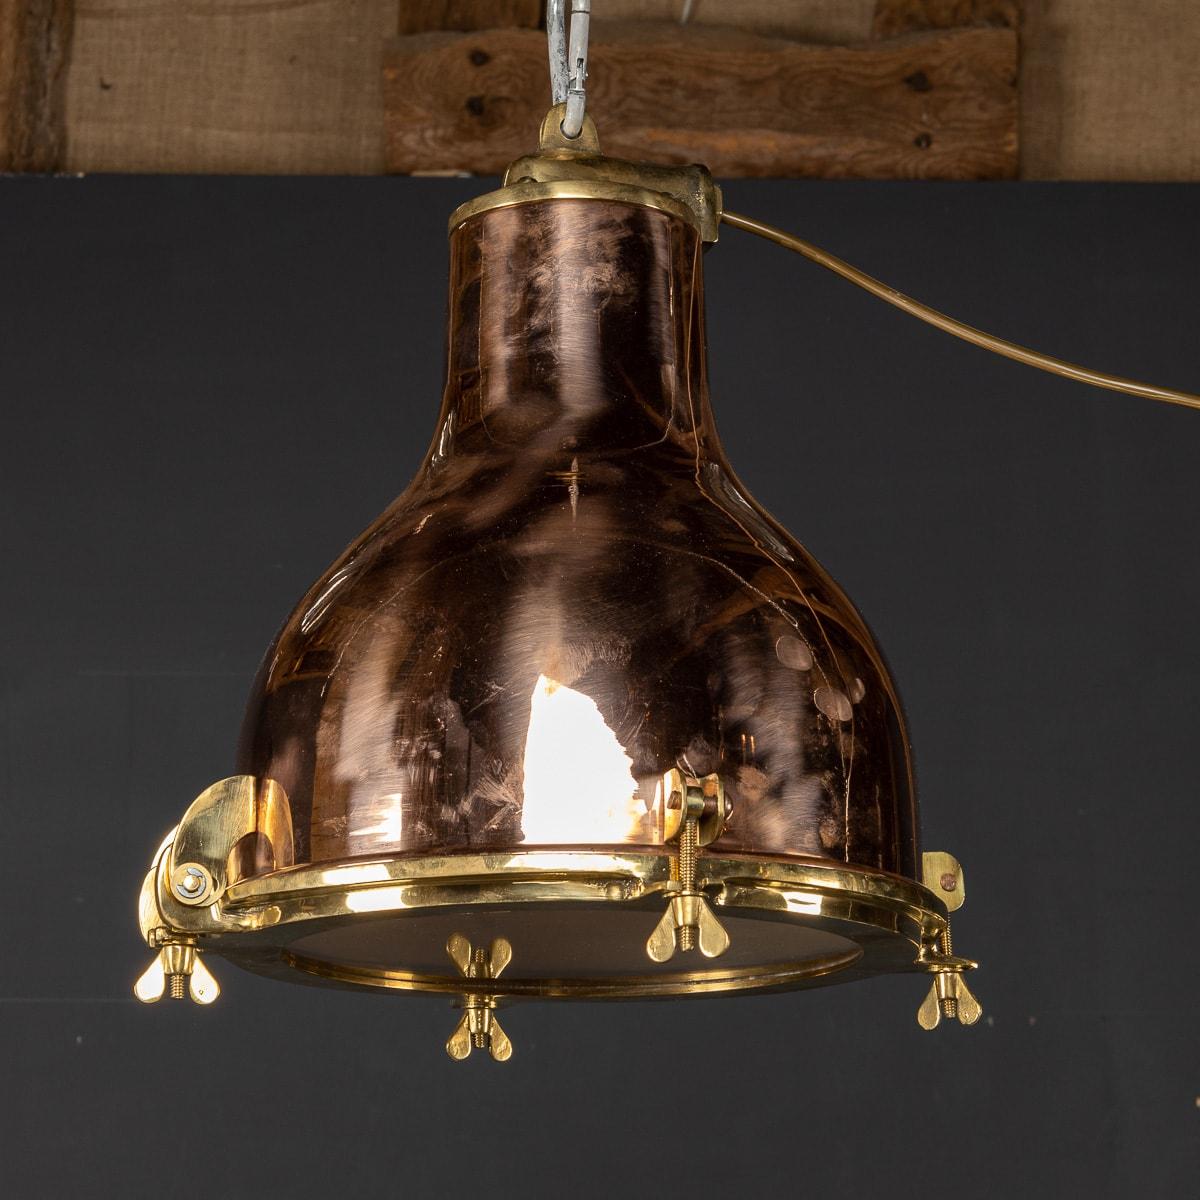 A fabulous polished brass light that once belonged to a Danish ship that circumnavigated the globe delivering cargo goods. Now, beautifully salvaged and restored to its former glory.

CONDITION
In Good Condition. (please refer to